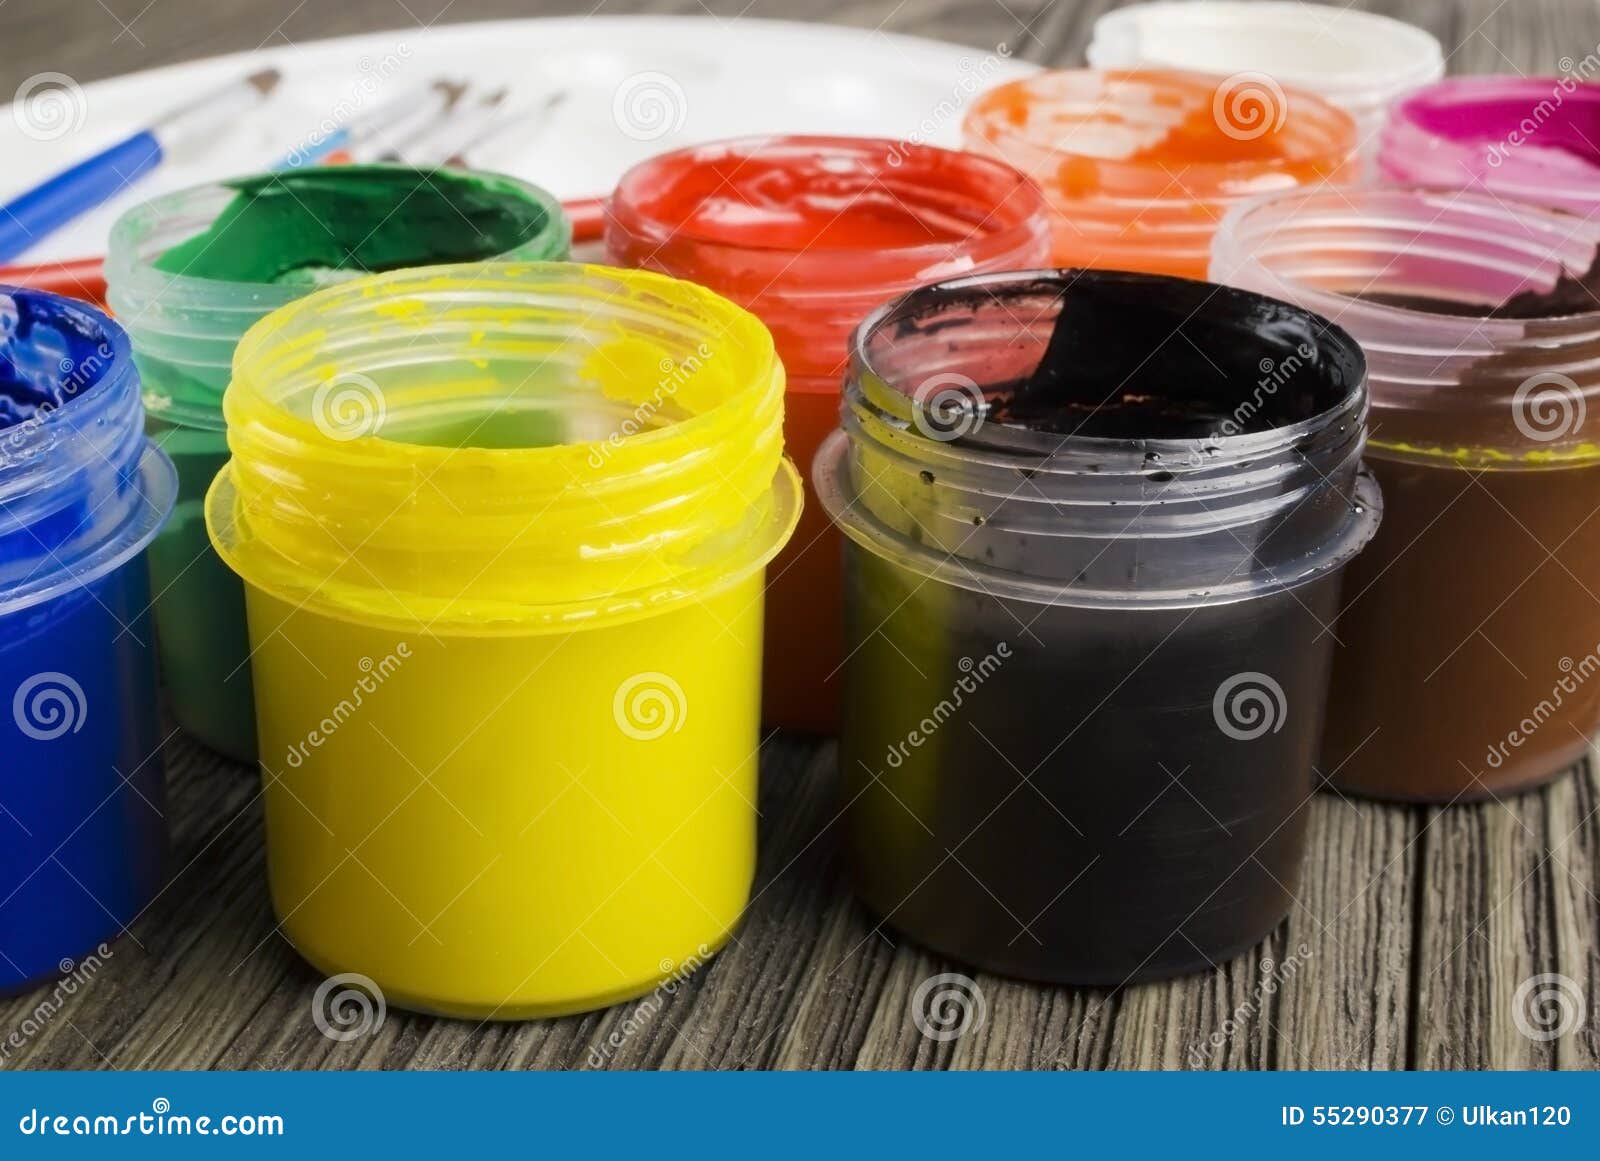 paint buckets and brush